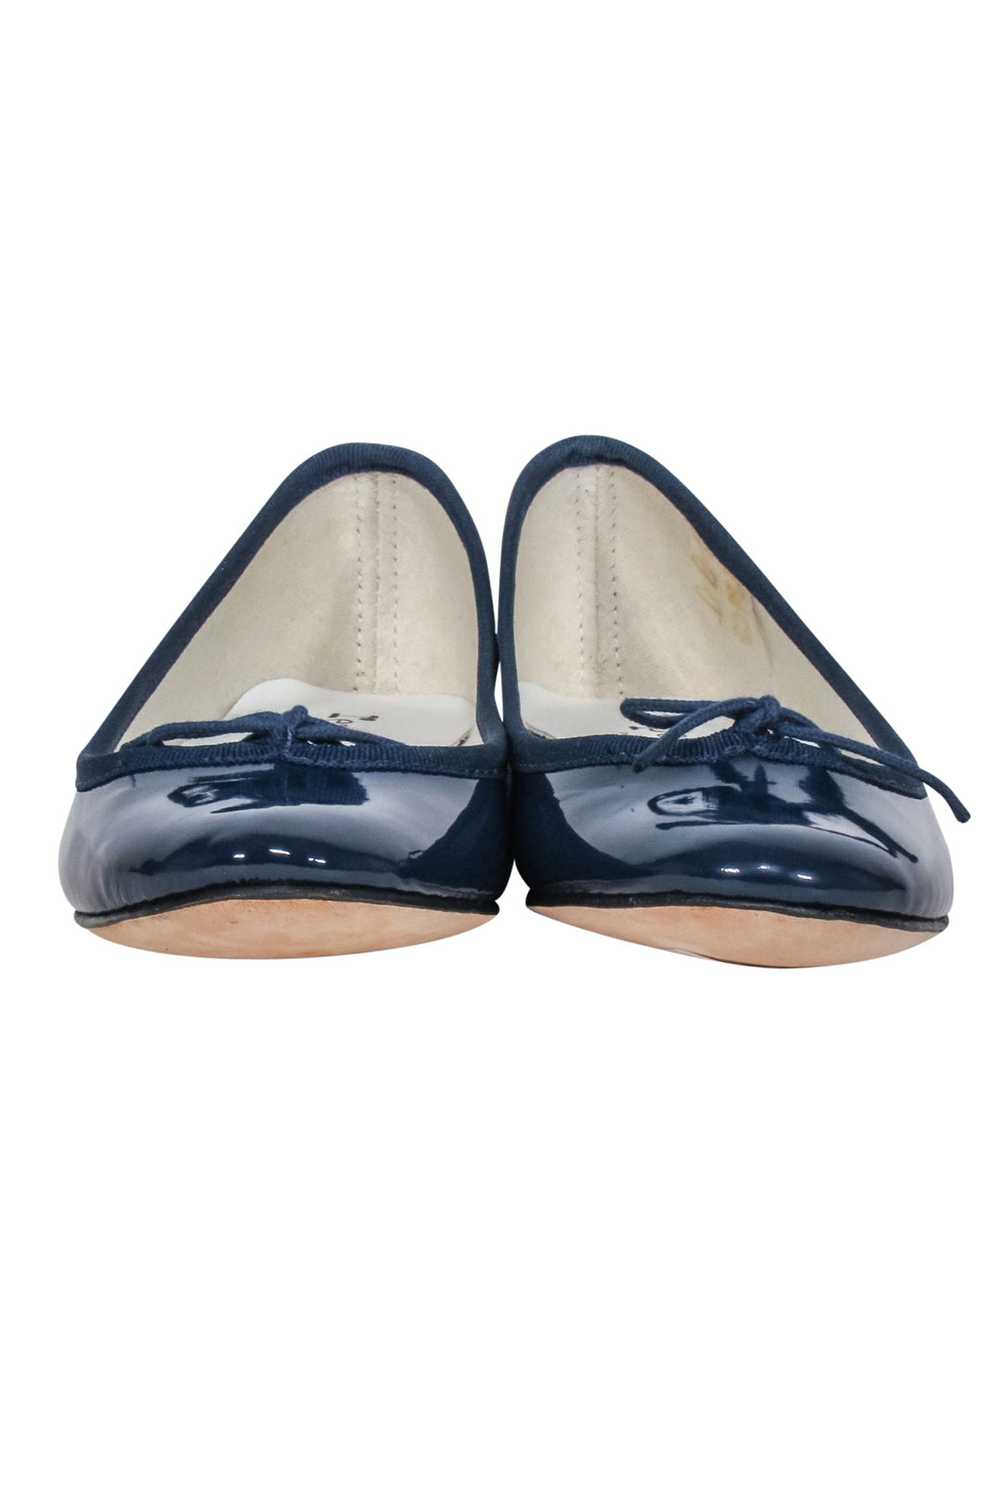 Repetto - Navy Patent Leather "Cendrillon" Ballet… - image 2